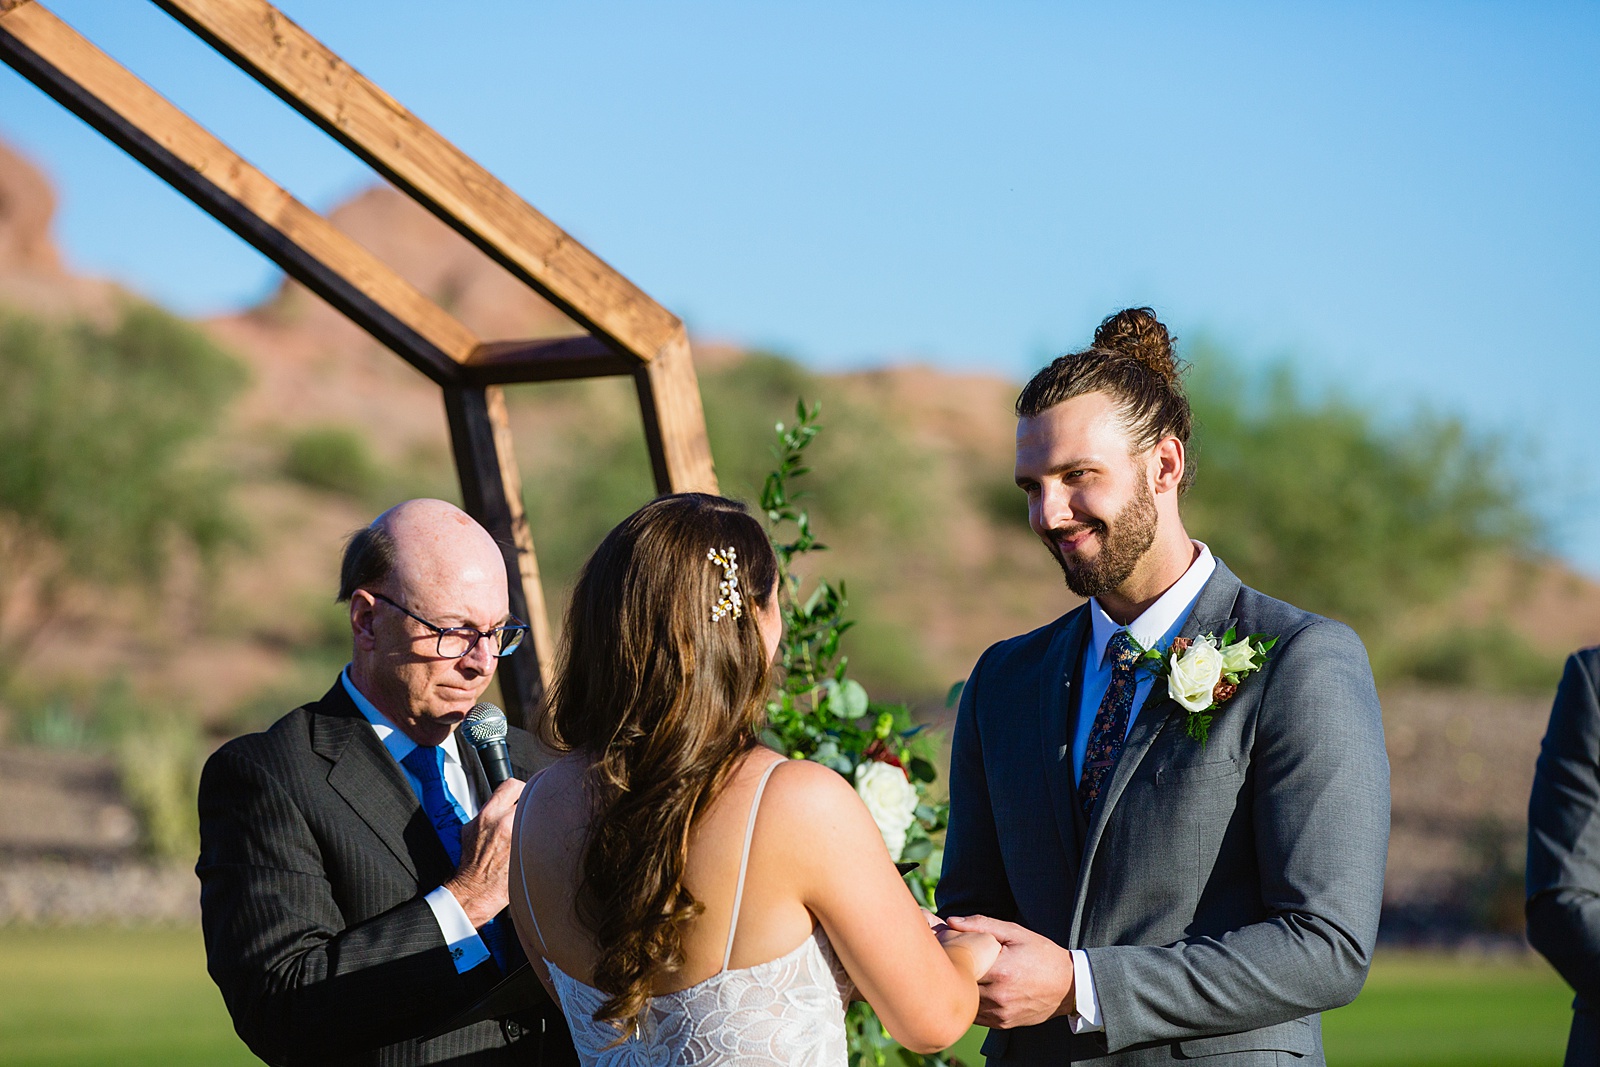 Groom looking at his bride during their wedding ceremony at Papago Events by Phoenix wedding photographer PMA Photography.